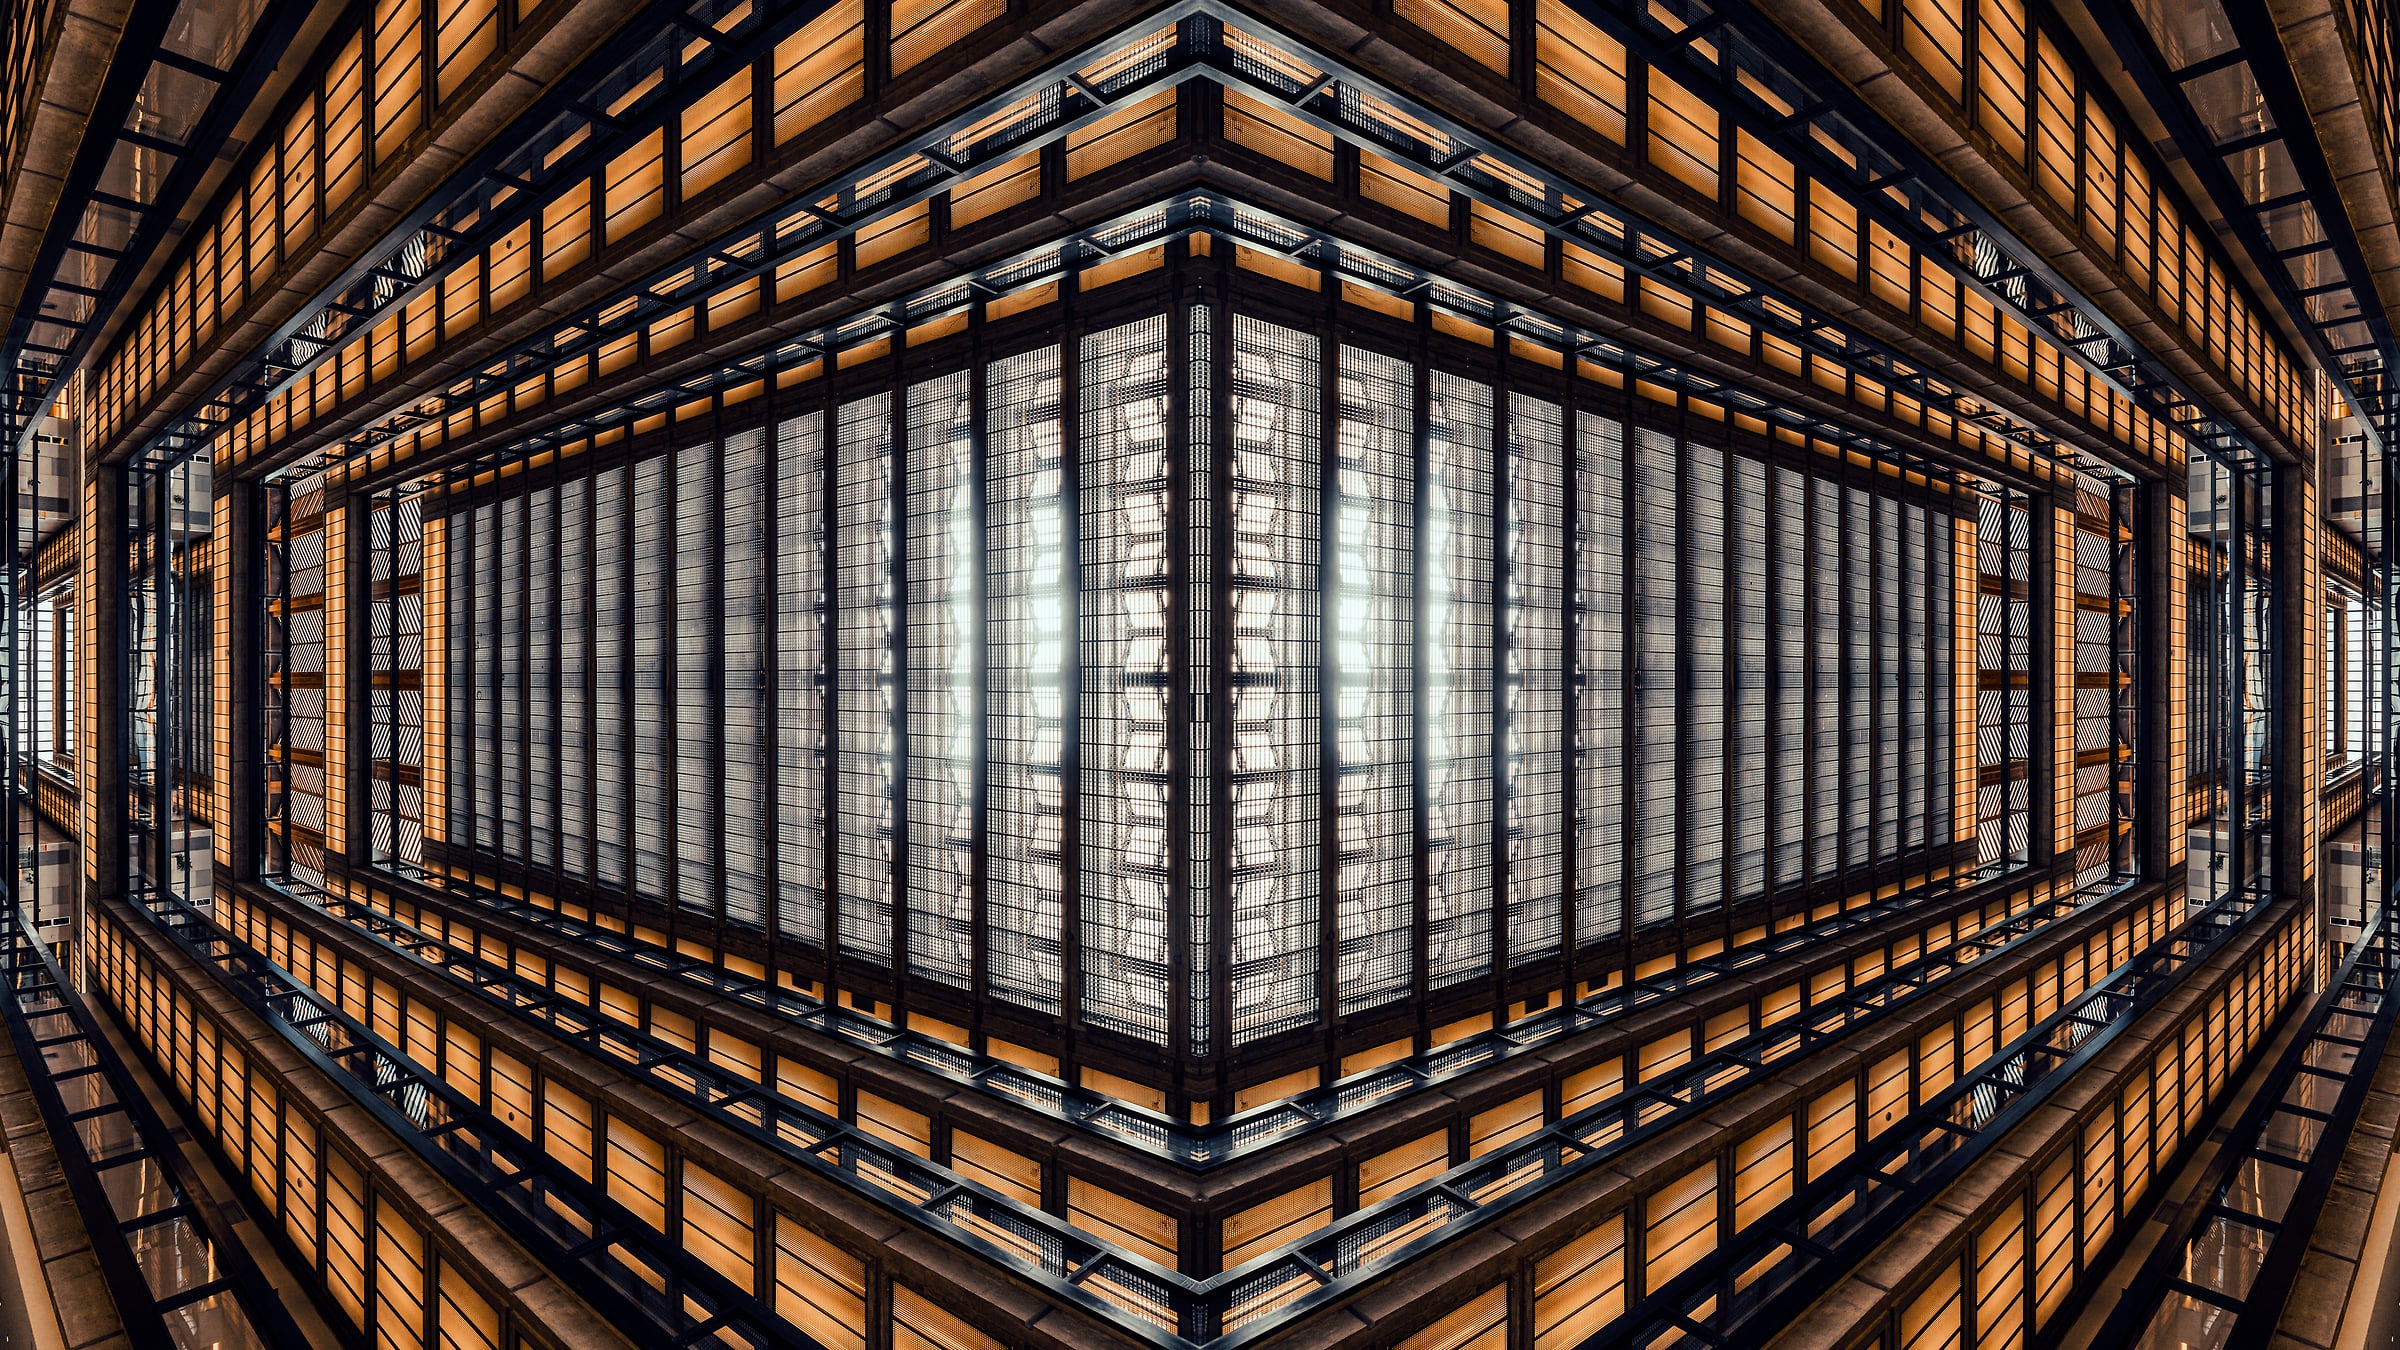 90 megapixels! A very high resolution, large-format, fine art architecture photo; photograph created by Beyti Barbaros at Bell Labs Holmdel Complex, Holmdel, NJ.